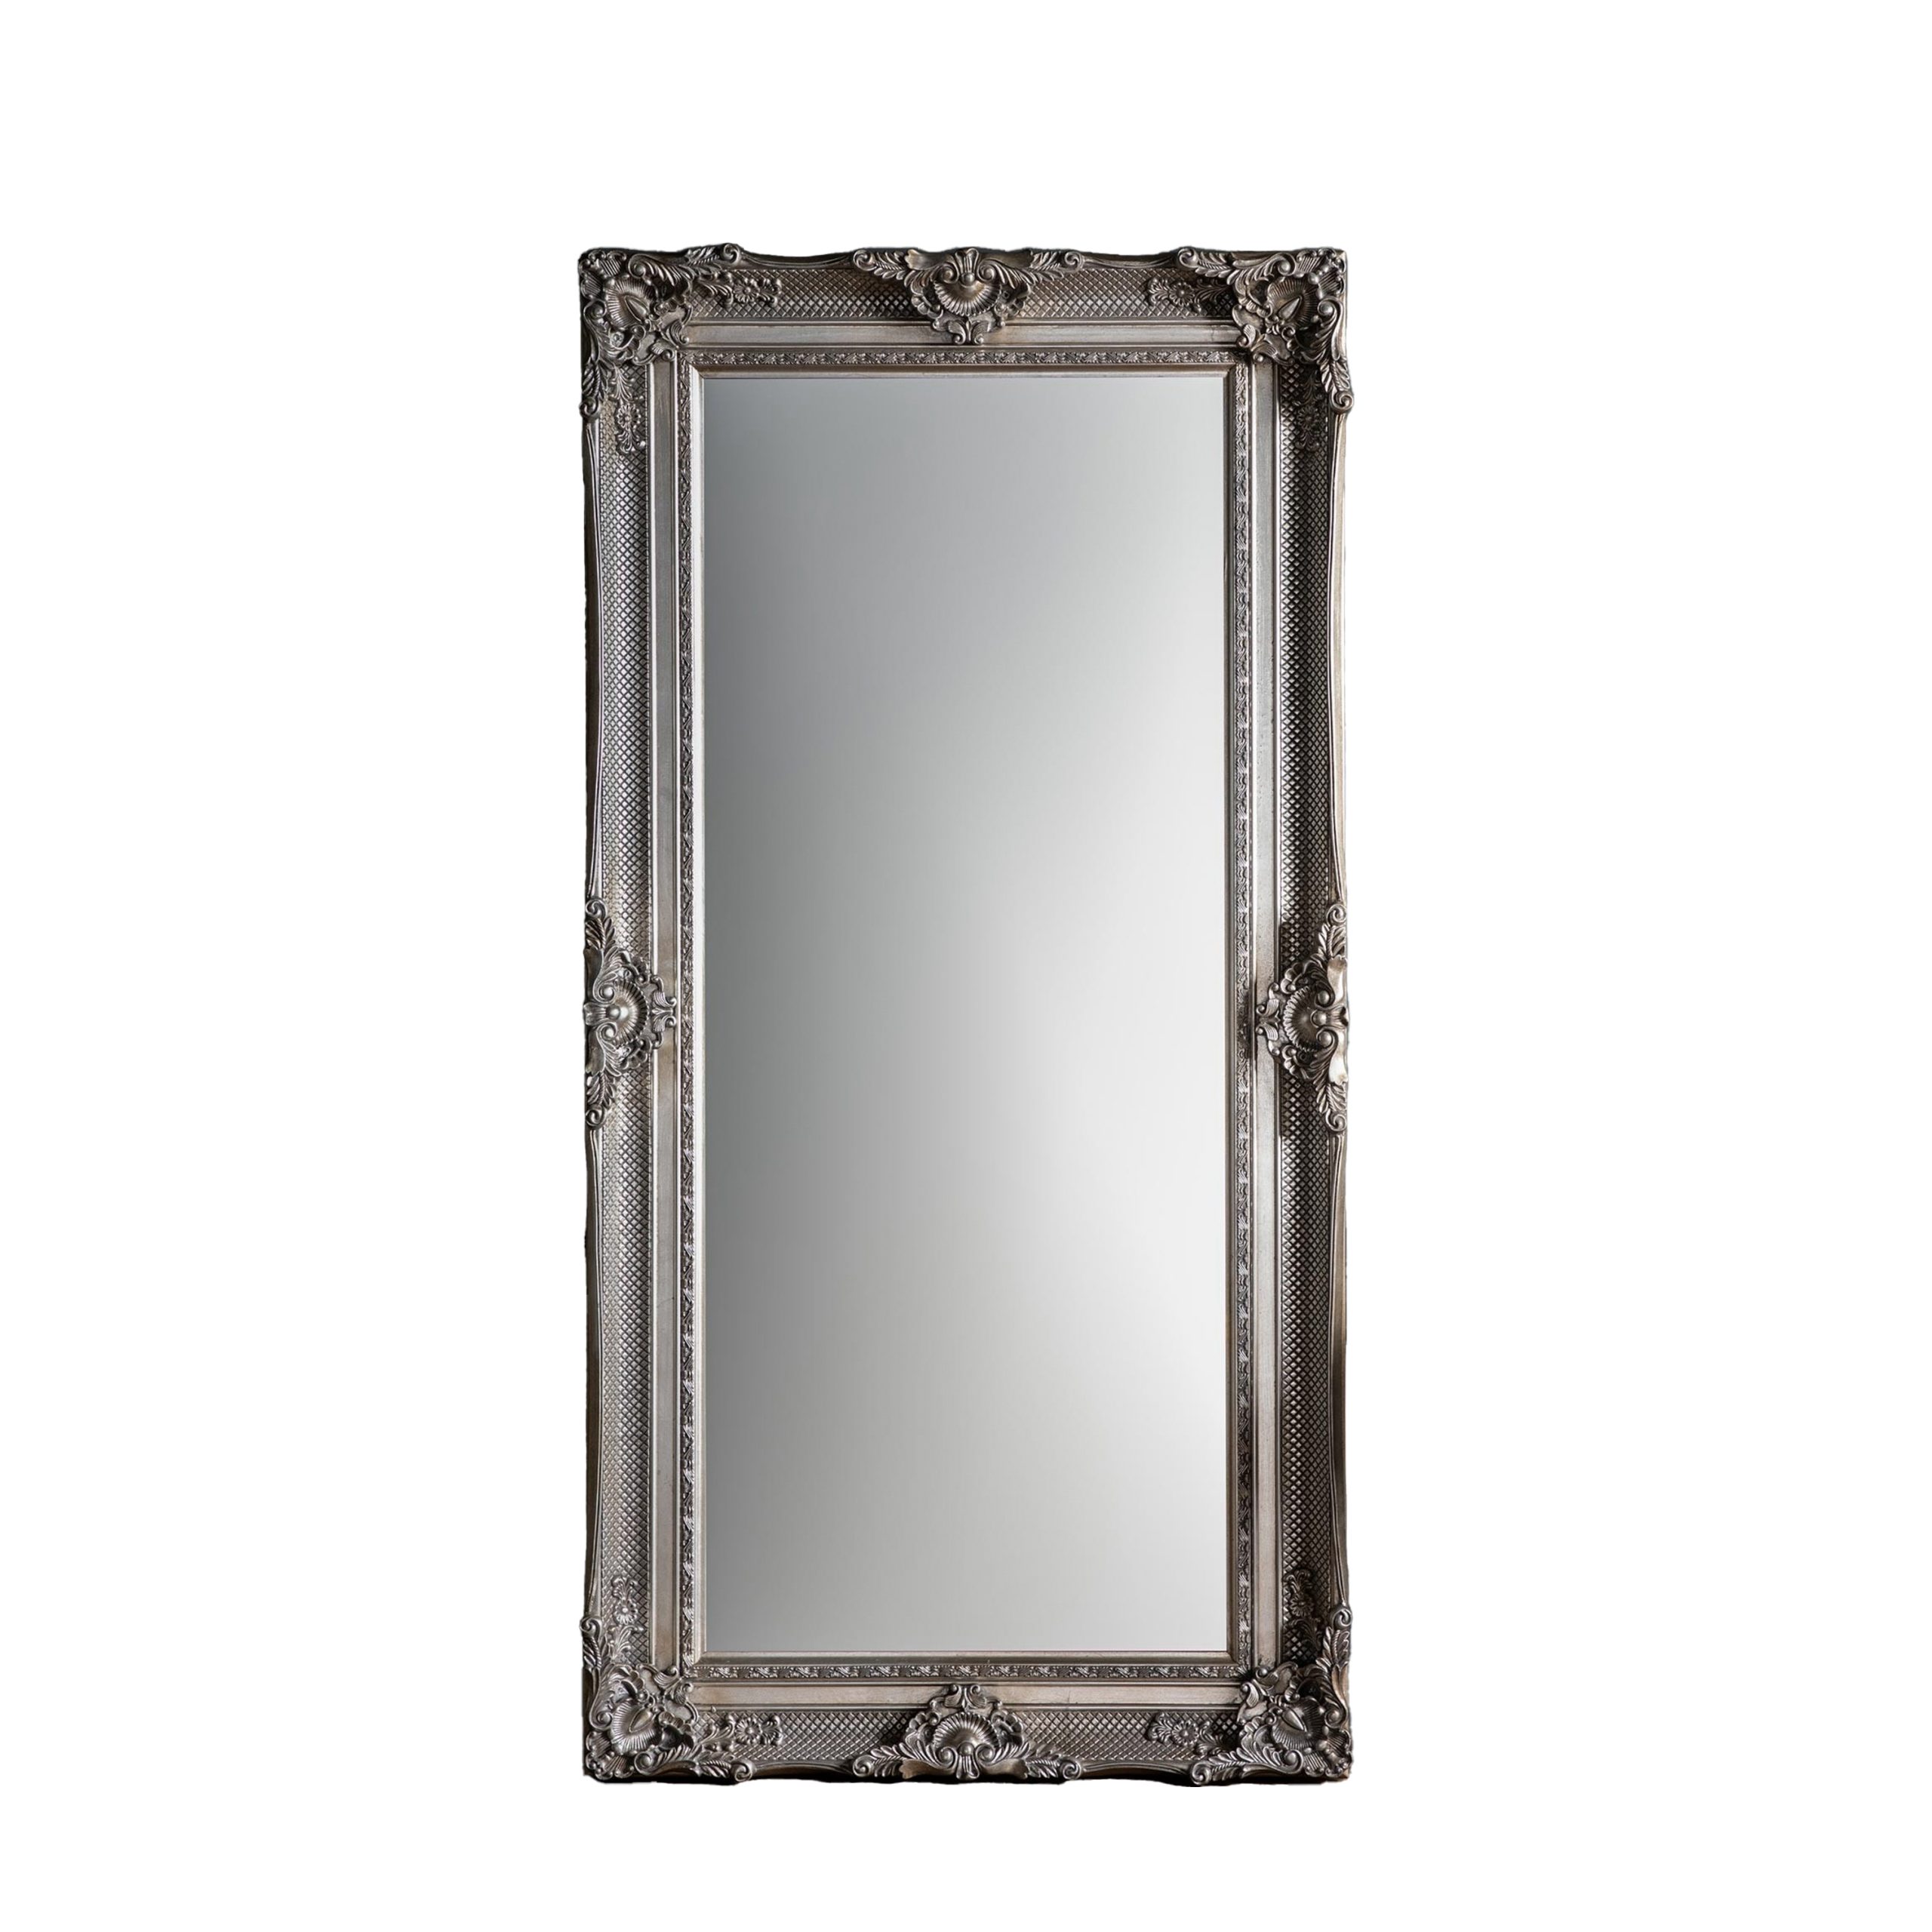 Gallery Direct Valois Leaner Mirror Silver